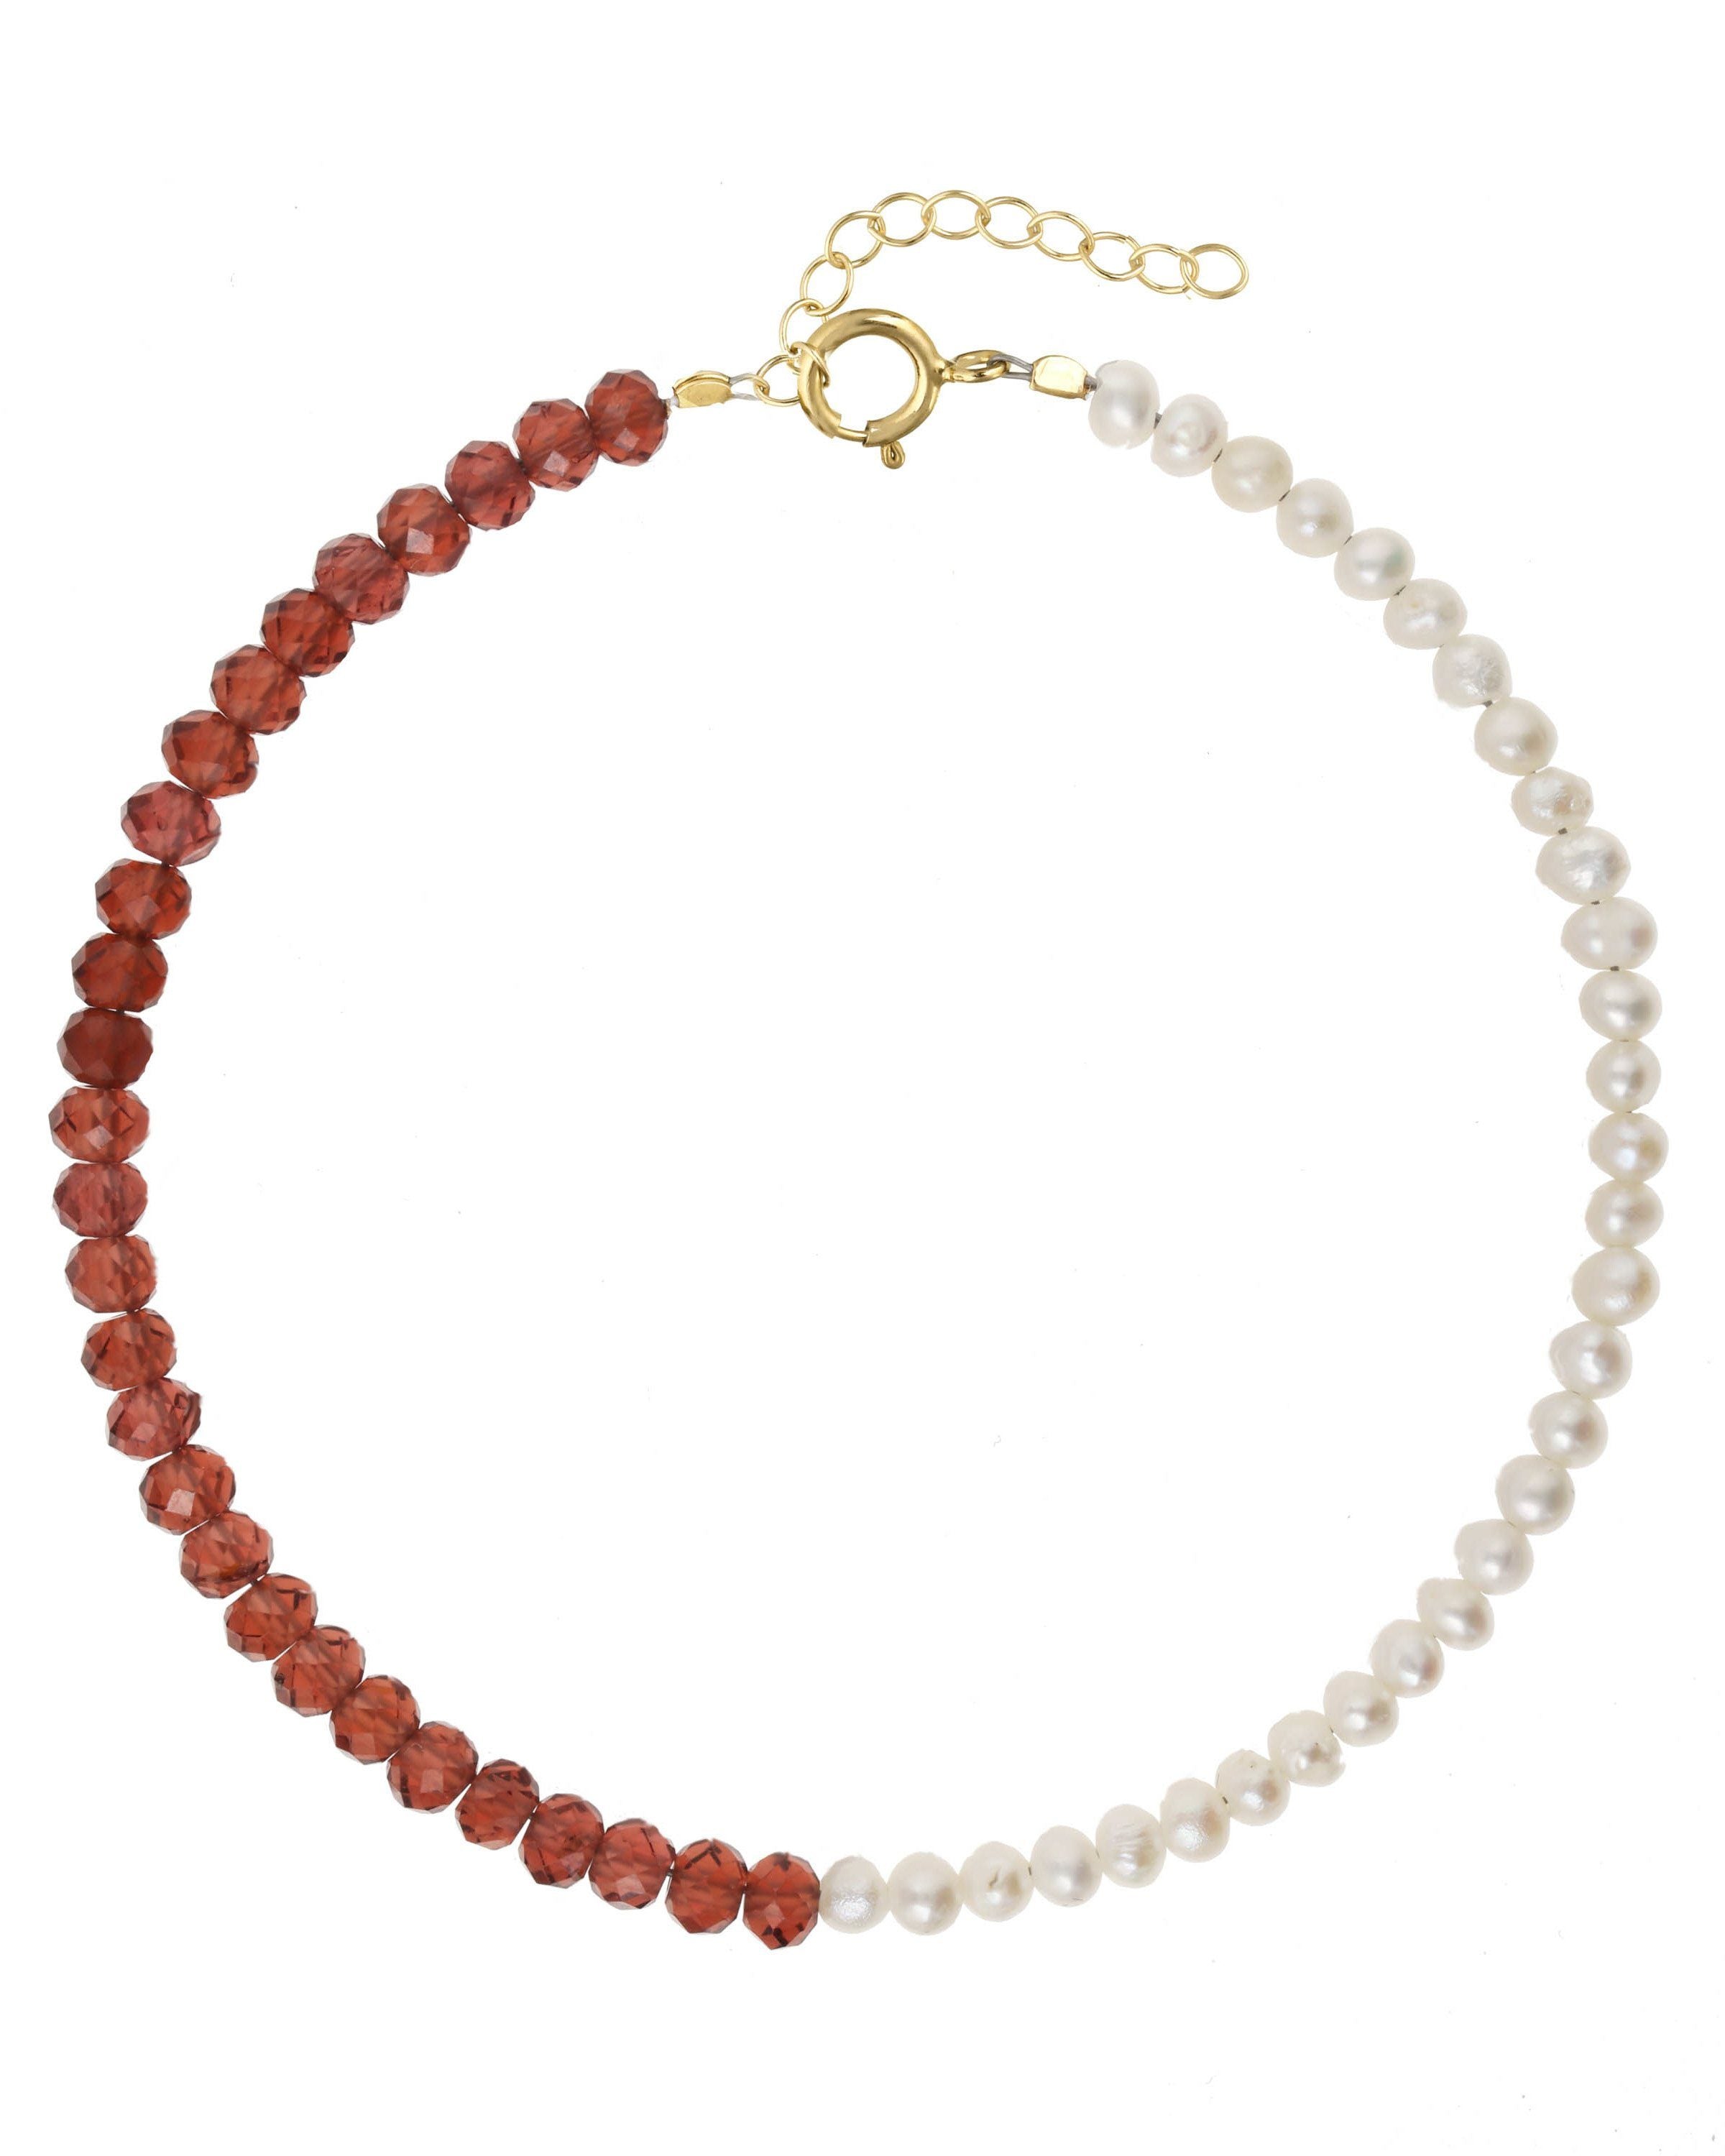 Elo Bracelet by KOZAKH. A 6 to 7 inch adjustable length bracelet, crafted in 14K Gold Filled. Half of the bracelet strand features 3.5mm Freshwater Pearls and 3.5mm Faceted Garnet beads on the other half.